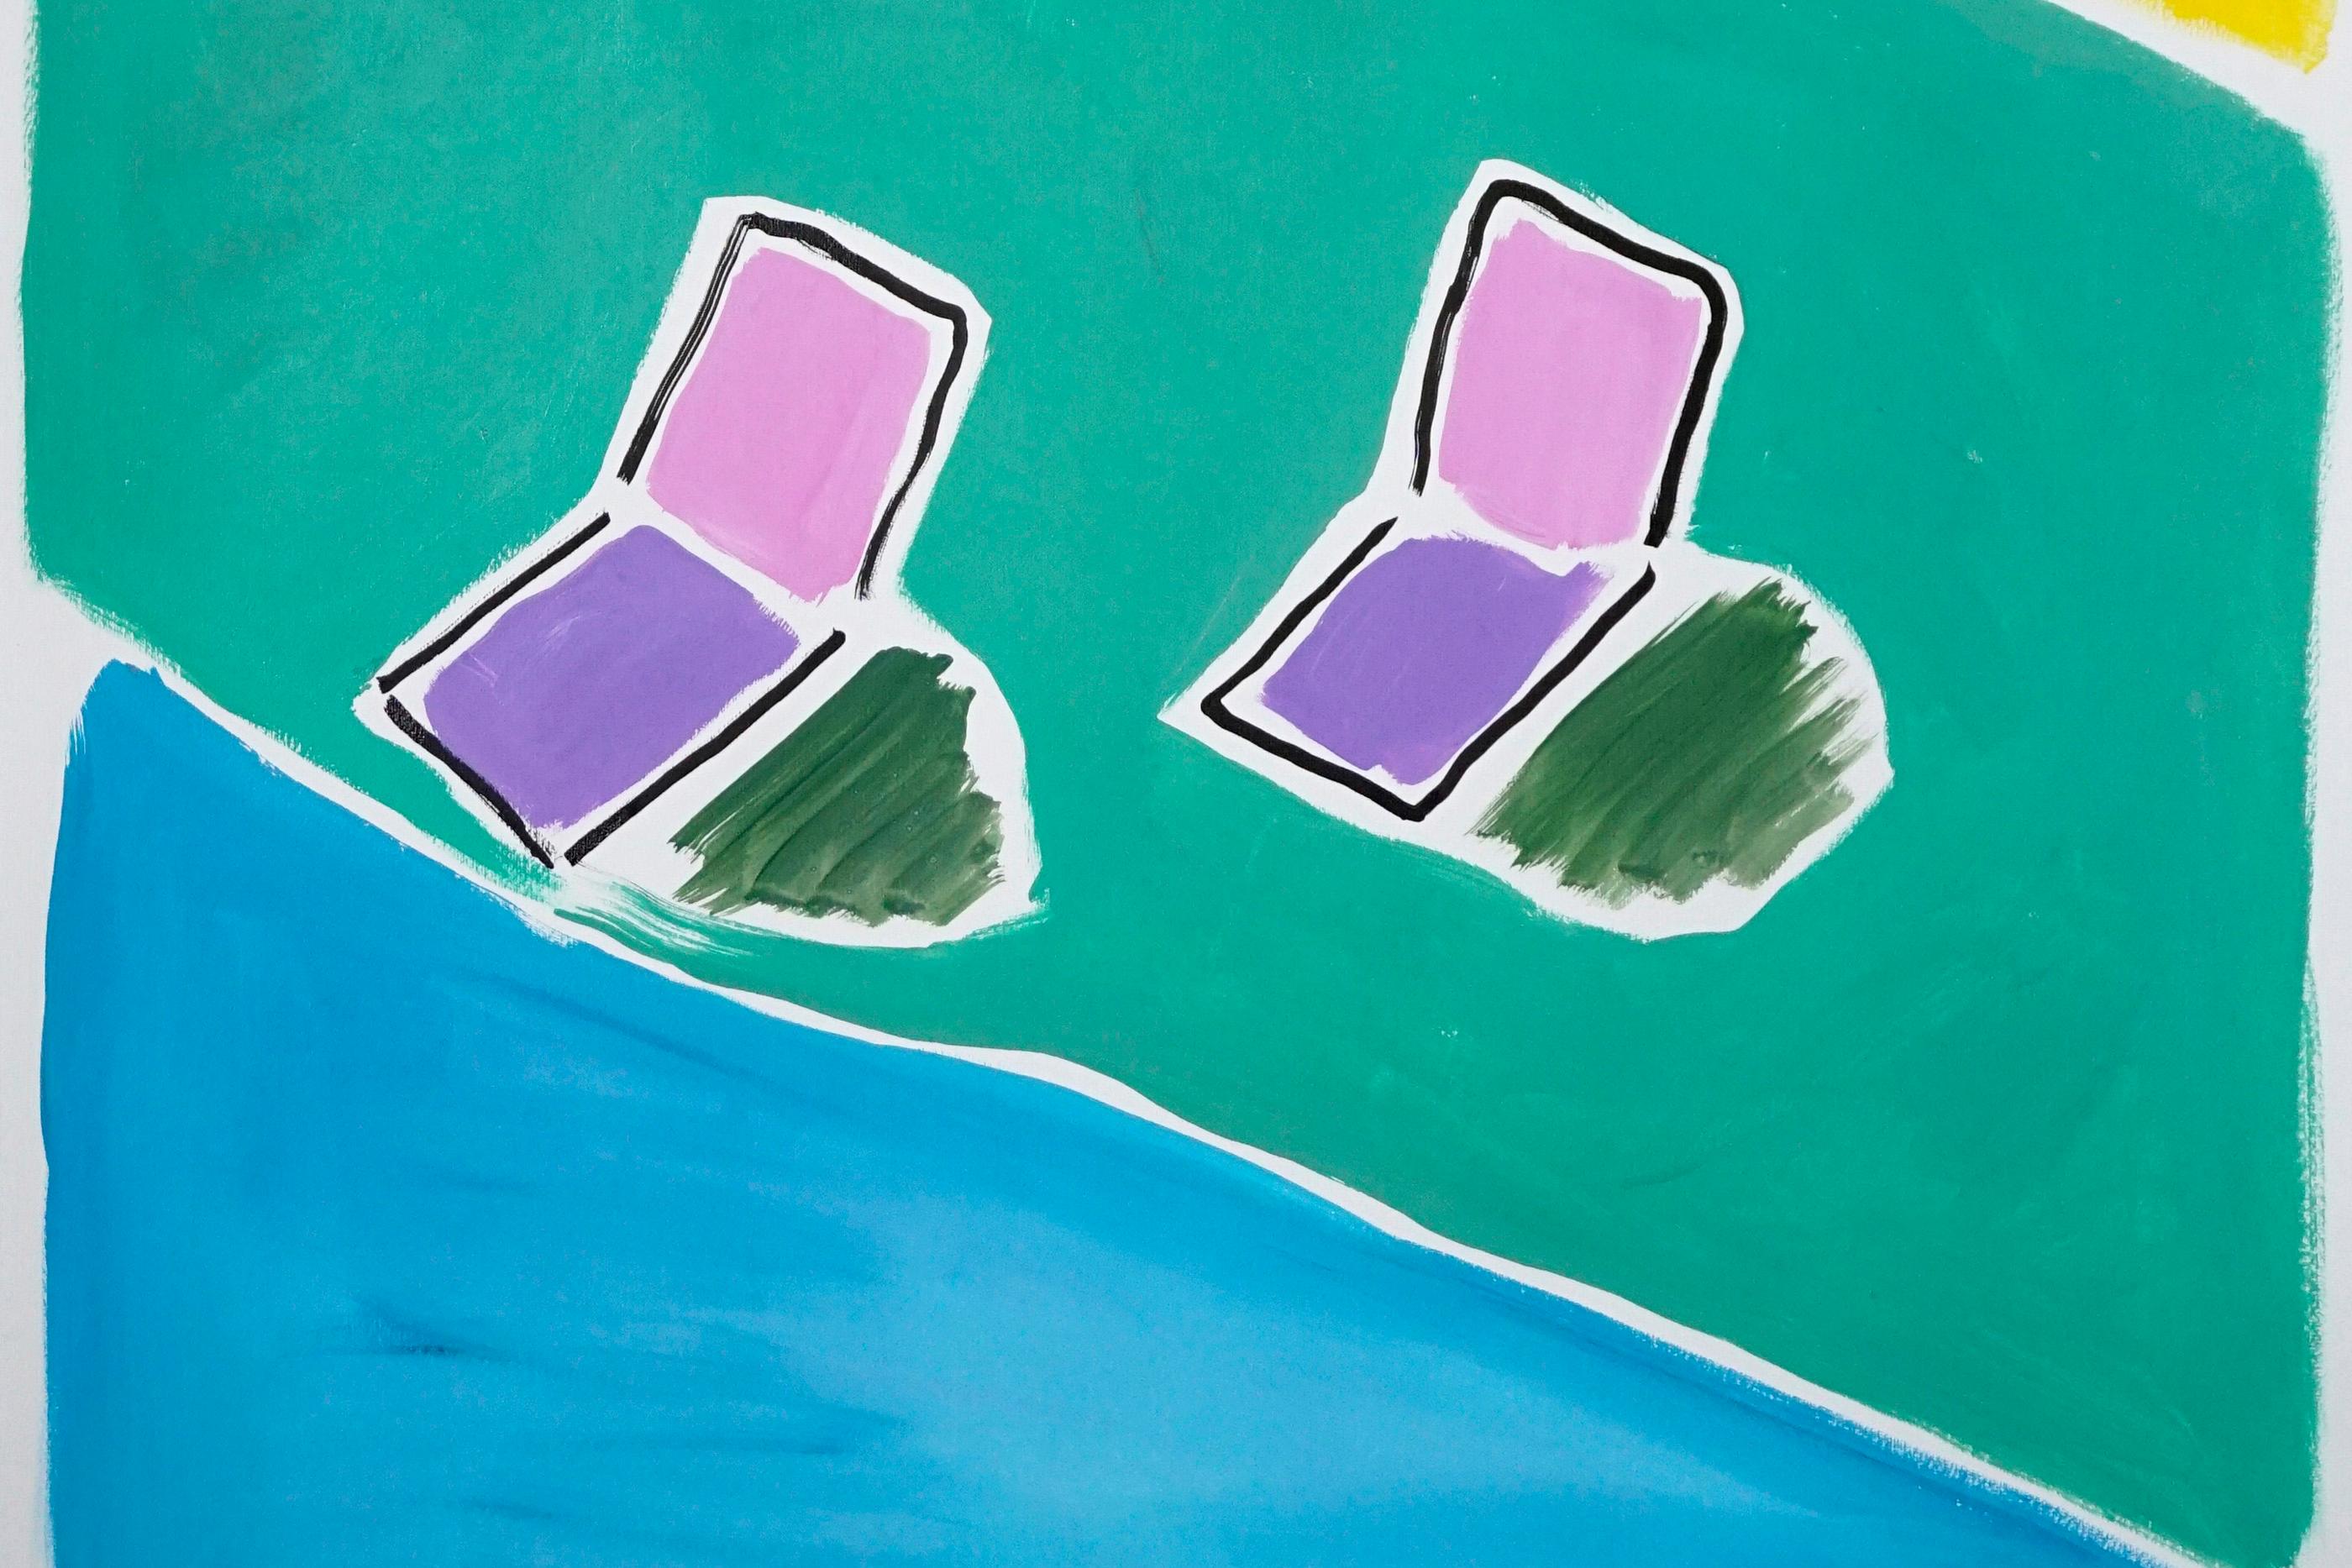 Reclining Chairs at Pool House, Garden Painting on Paper, Hockney Style, 2021 1